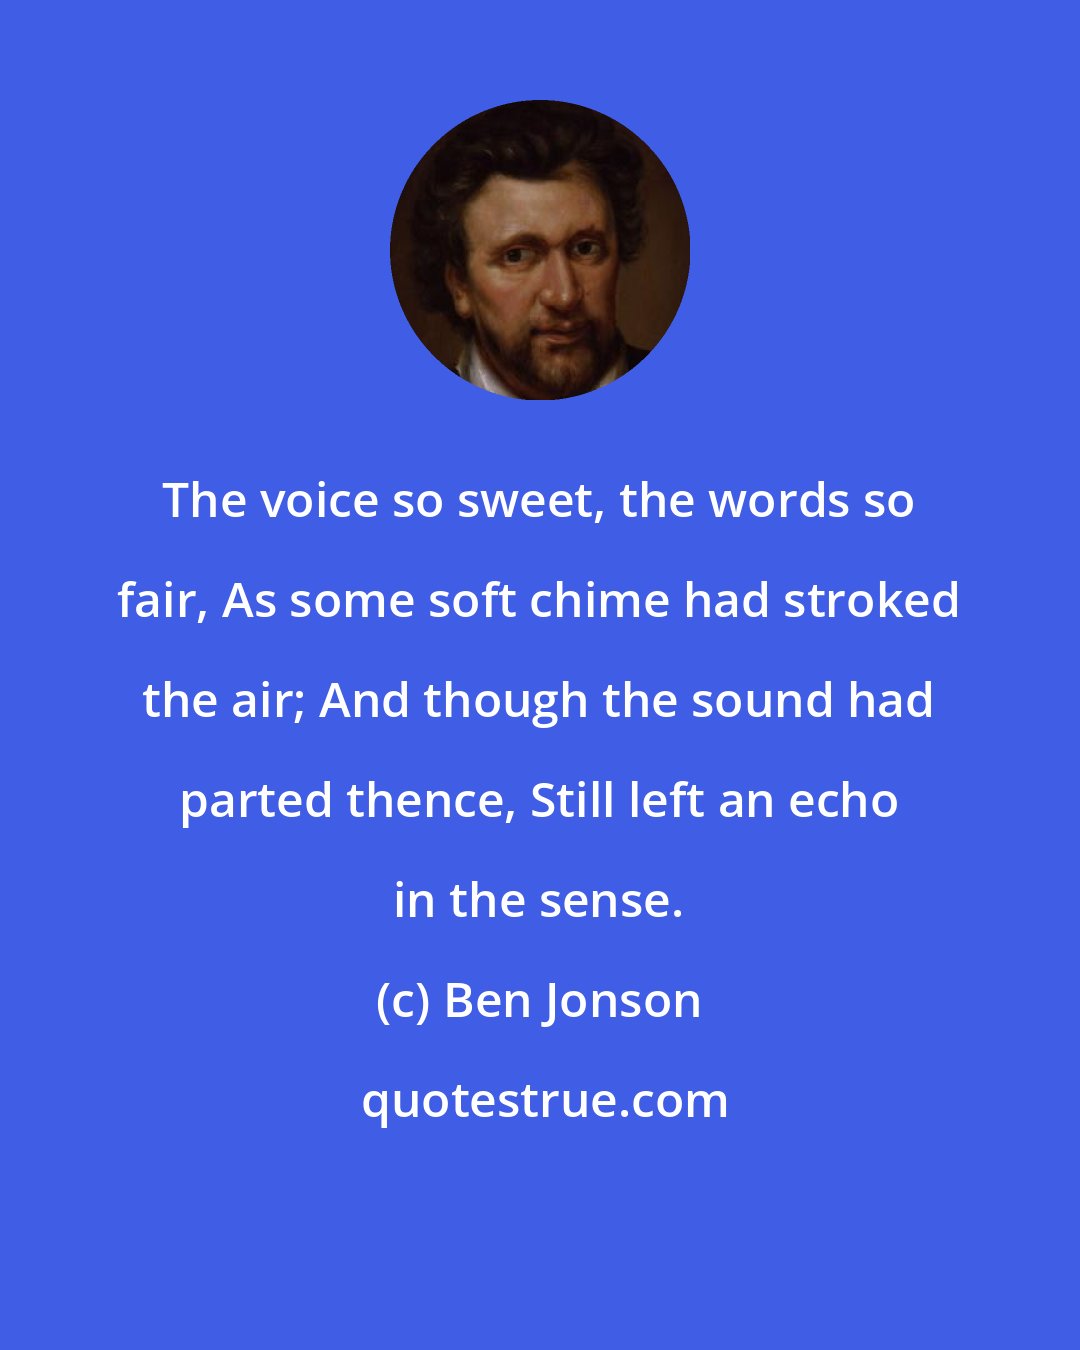 Ben Jonson: The voice so sweet, the words so fair, As some soft chime had stroked the air; And though the sound had parted thence, Still left an echo in the sense.